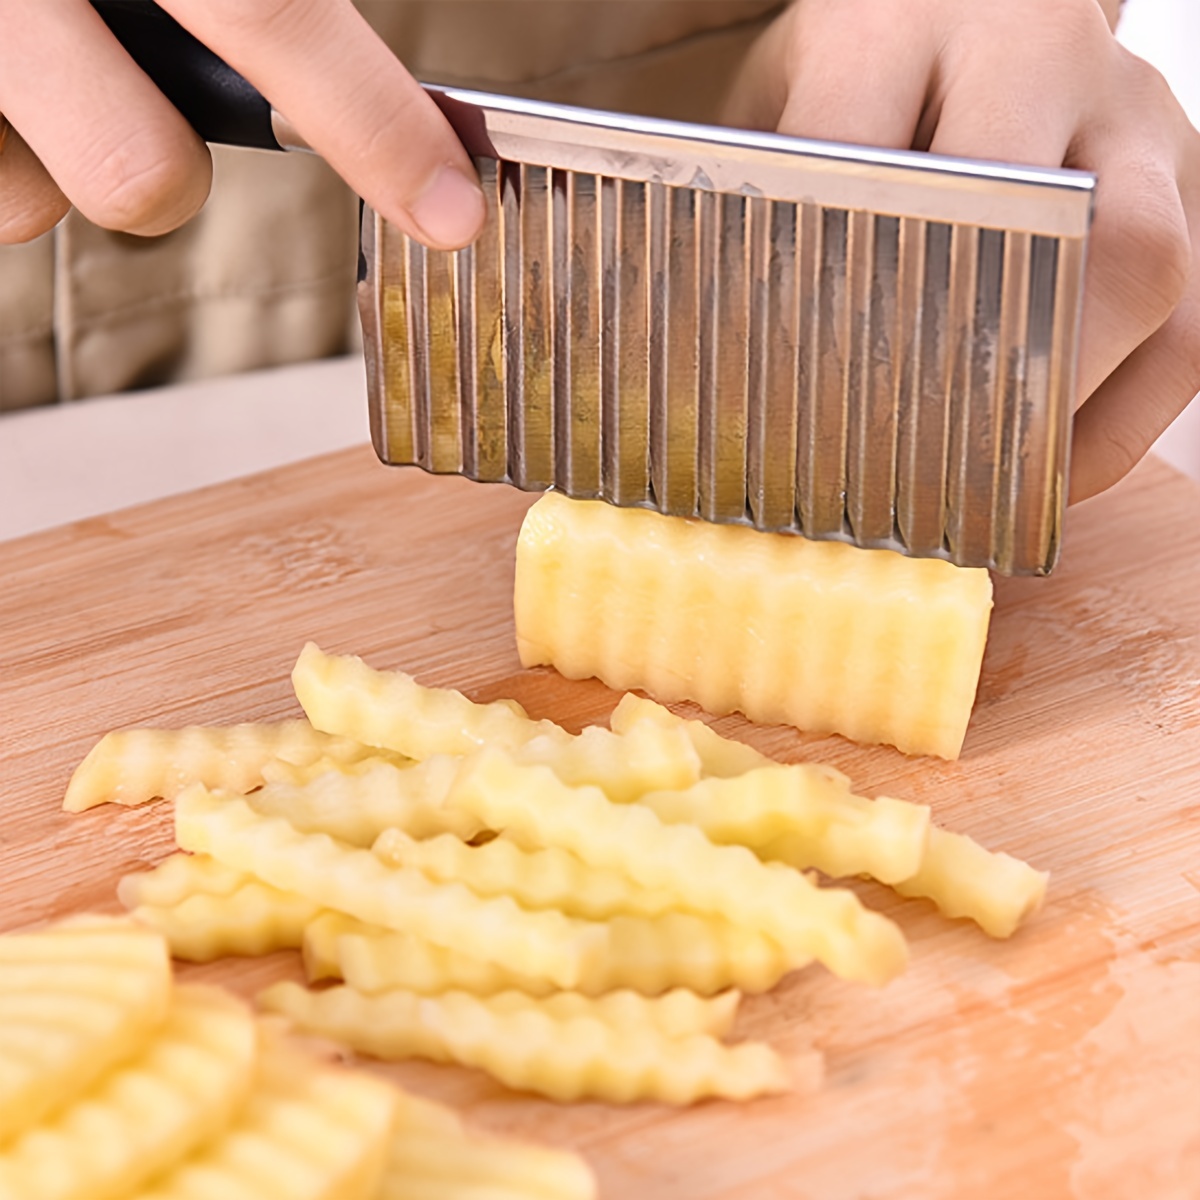 How to make potato crinkle french fries Cutter, crinkle cutter for waffle  fries